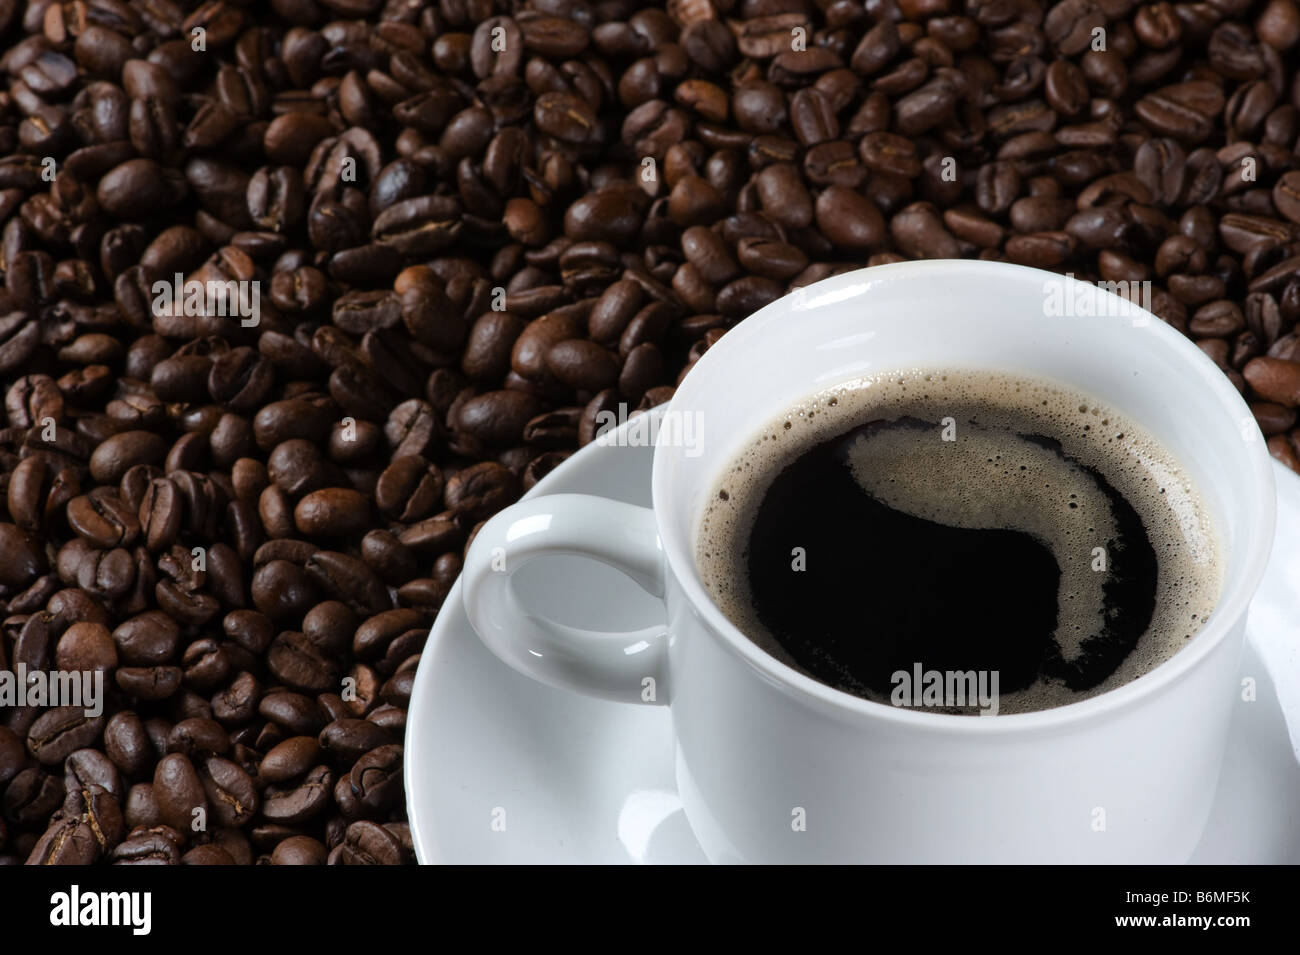 Closeup of a cup of fresh coffee served on a plate covered with freshly roasted coffee beans Stock Photo